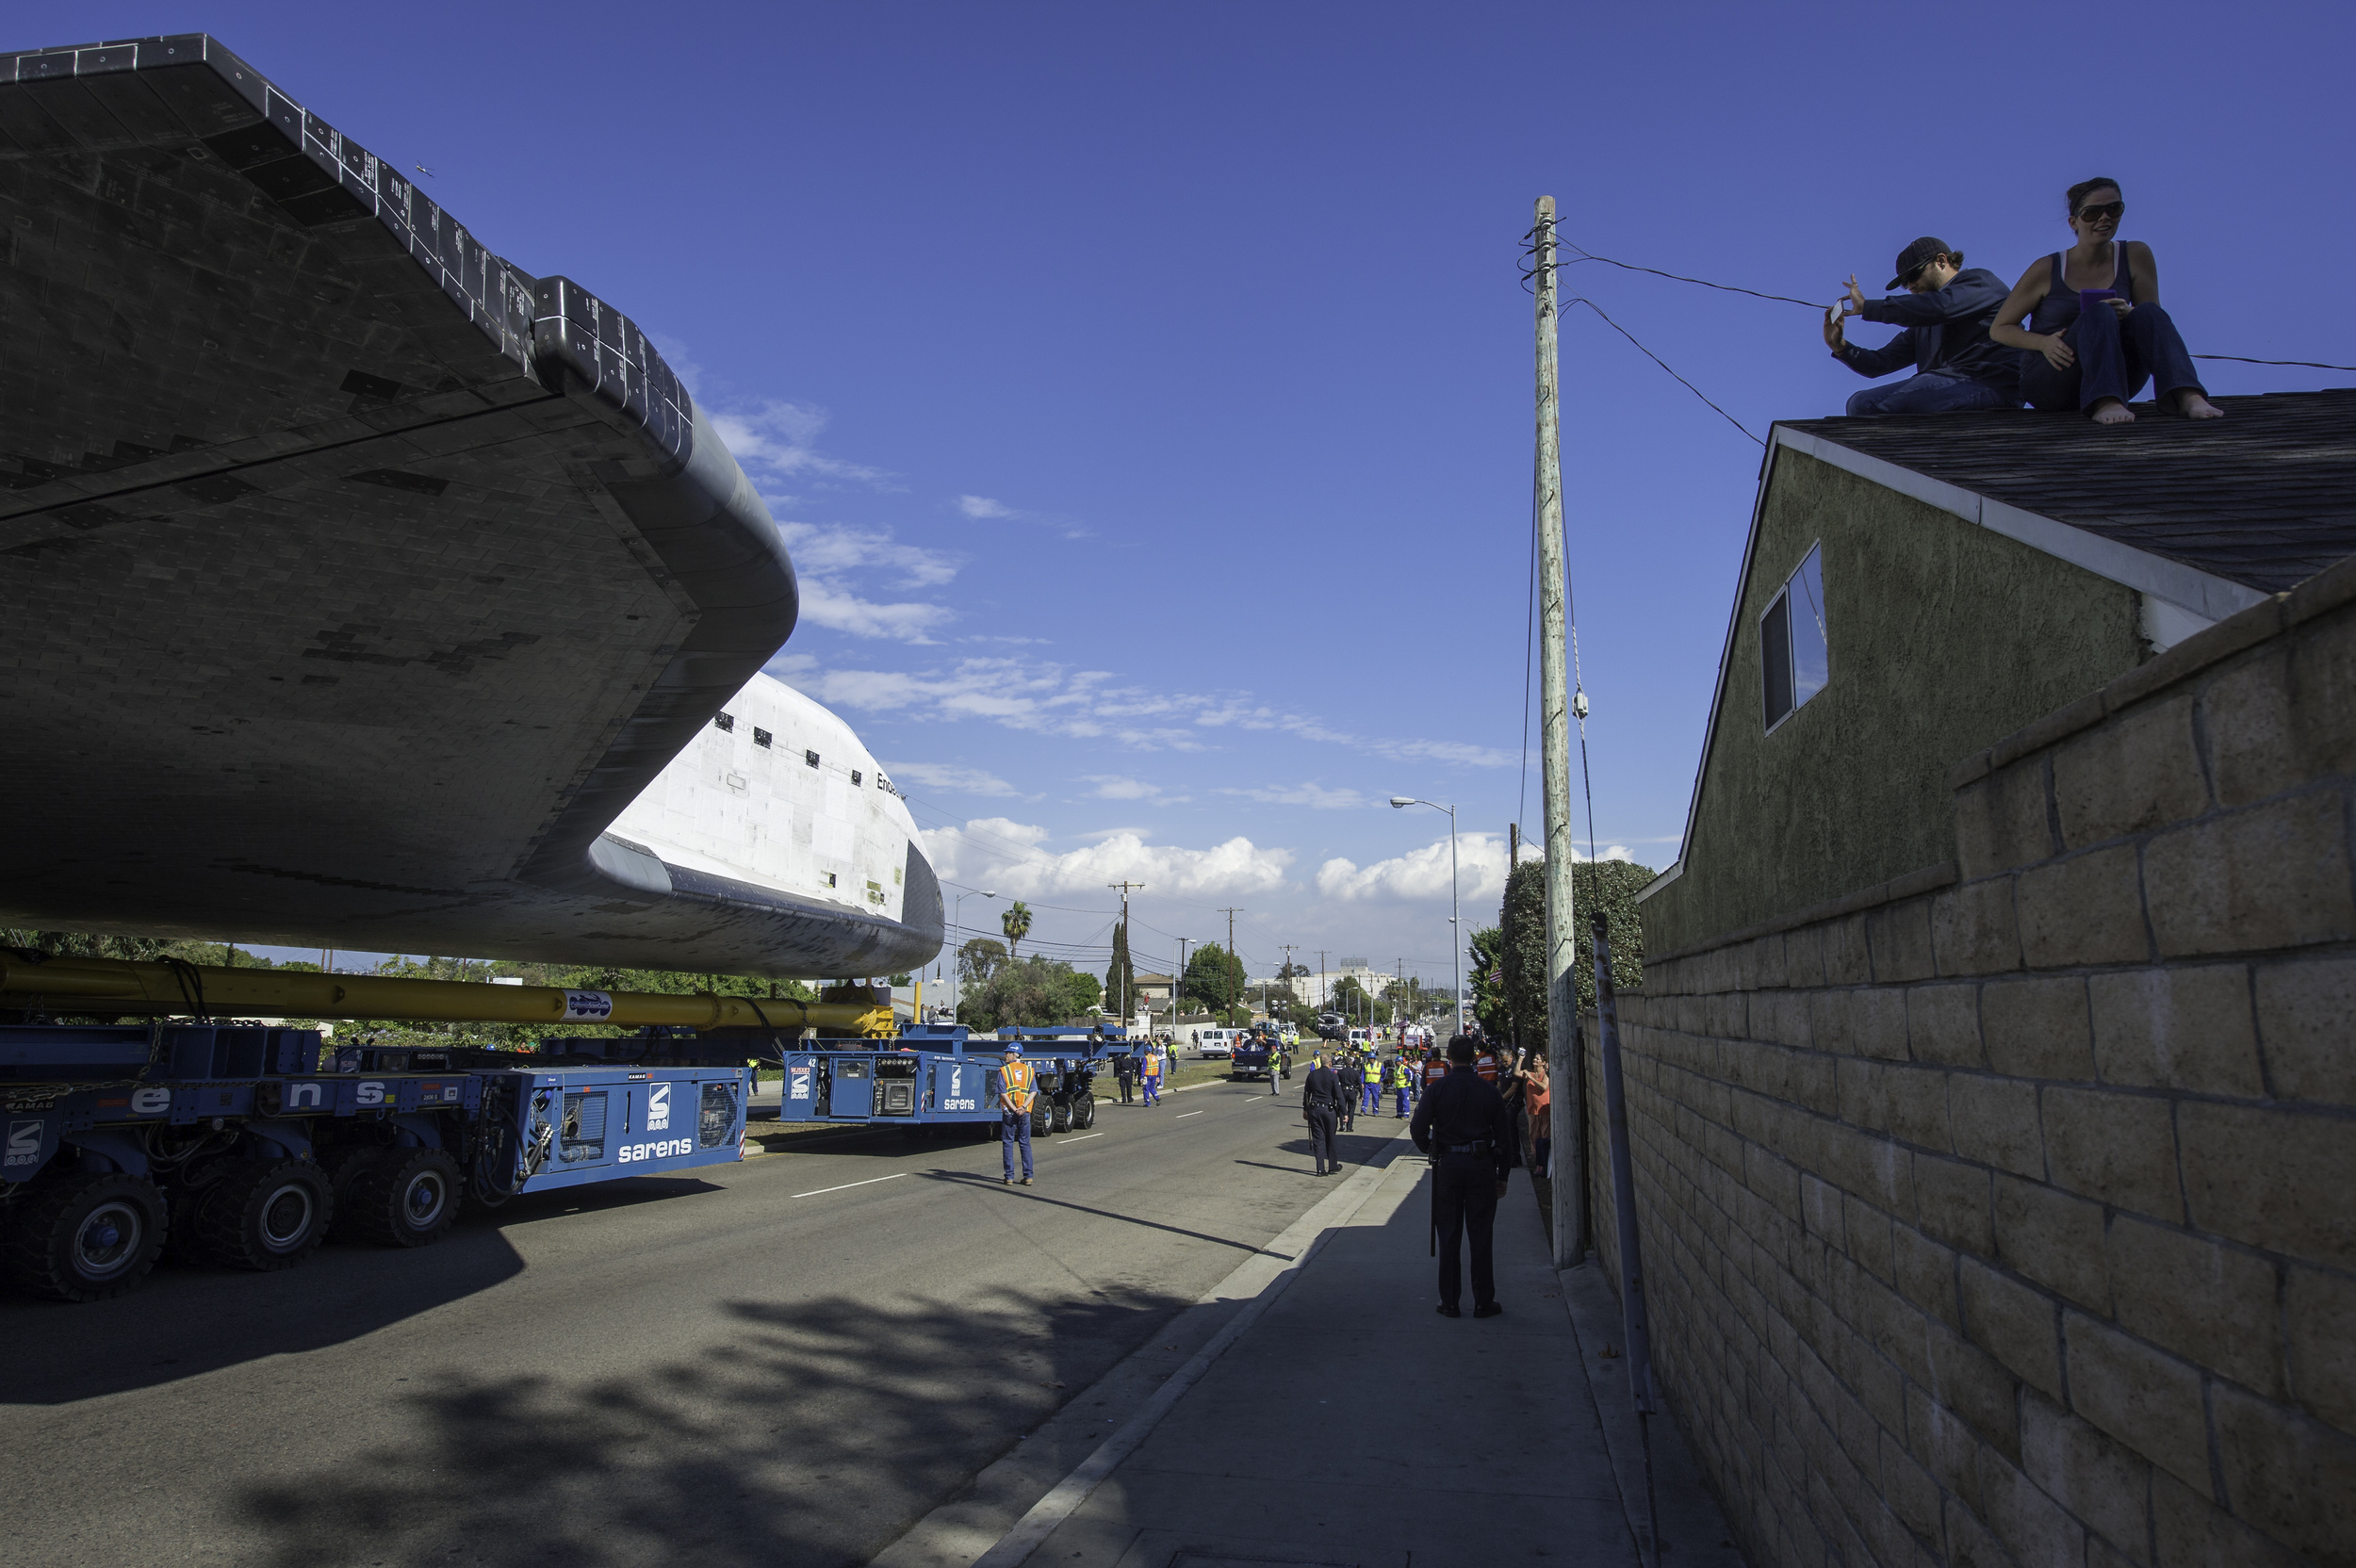  A spectator on the roof of a building photographs space shuttle Endeavour as it passes by on its way to its new home at the California Science Center in Los Angeles, Friday, Oct. 12, 2012. Endeavour, built as a replacement for space shuttle Challeng